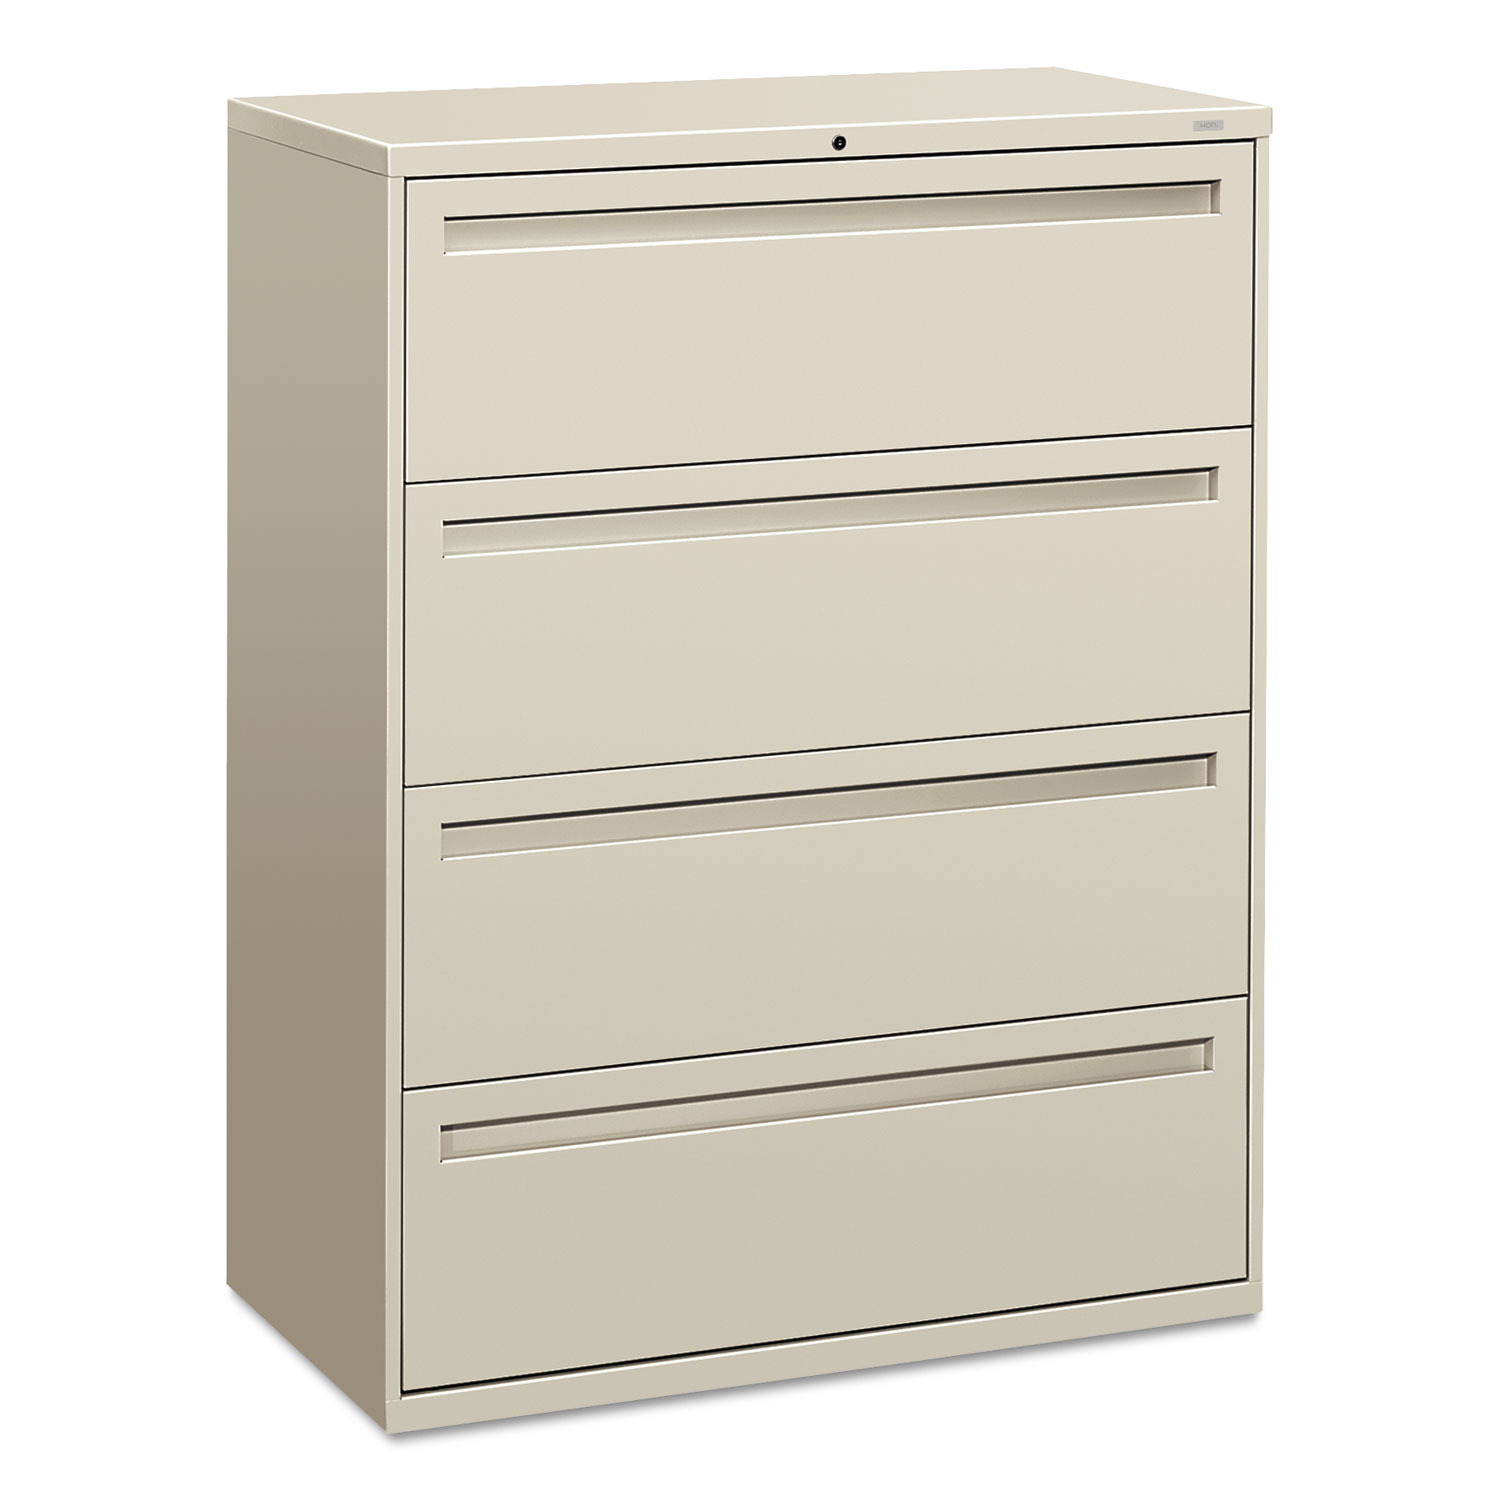 700 Series Four-Drawer Lateral File, 42w x 19-1/4d, Light Gray